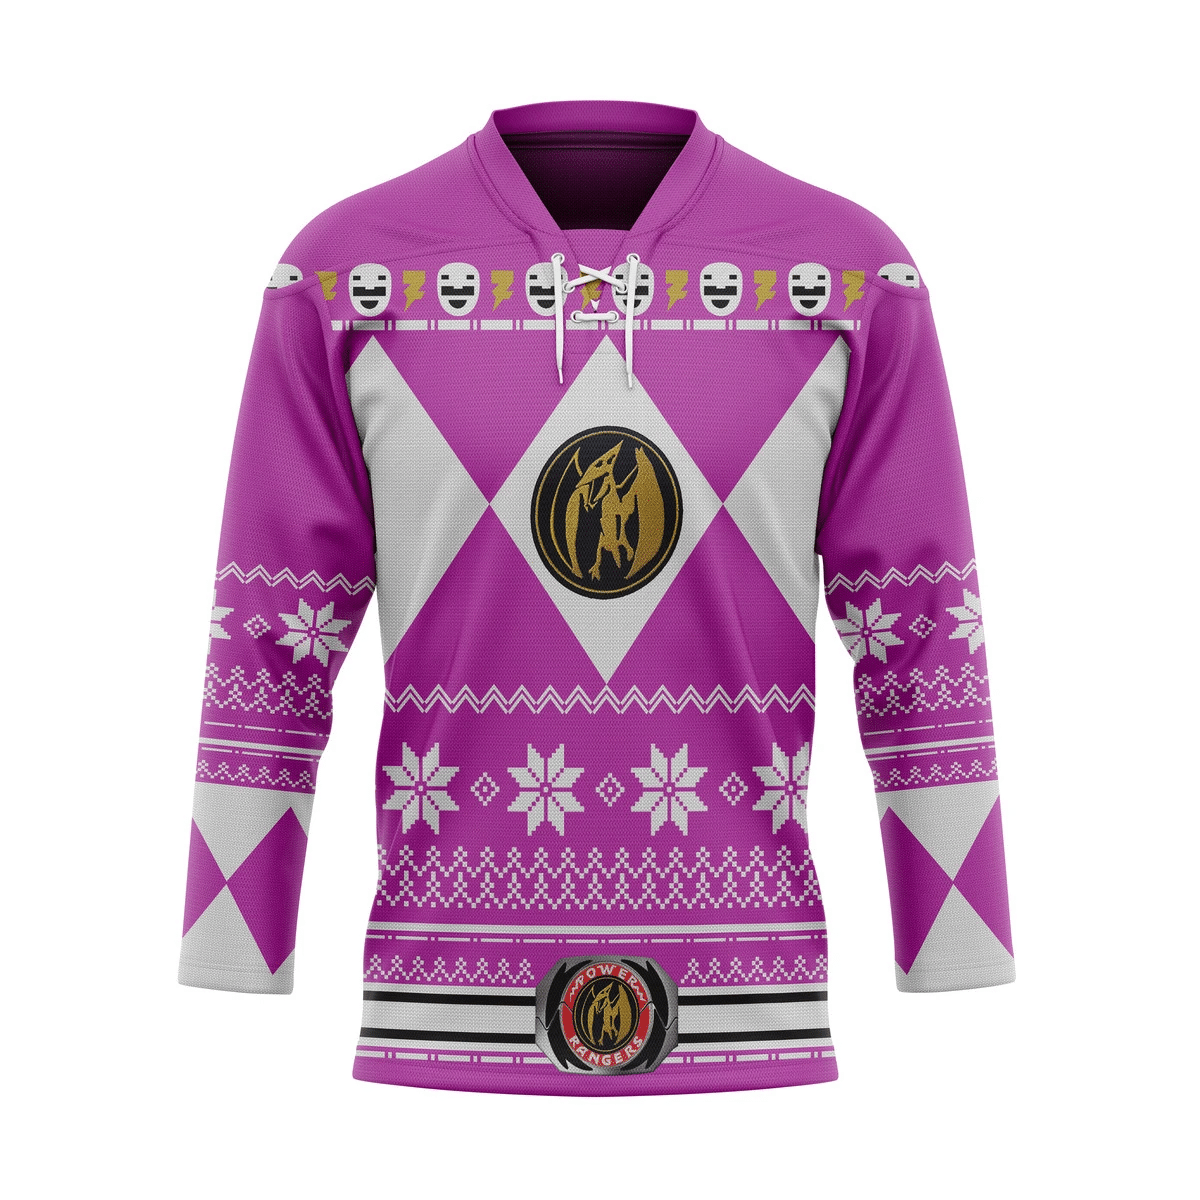 Check out our collection of unique and stylish hockey jerseys from all over the world 158